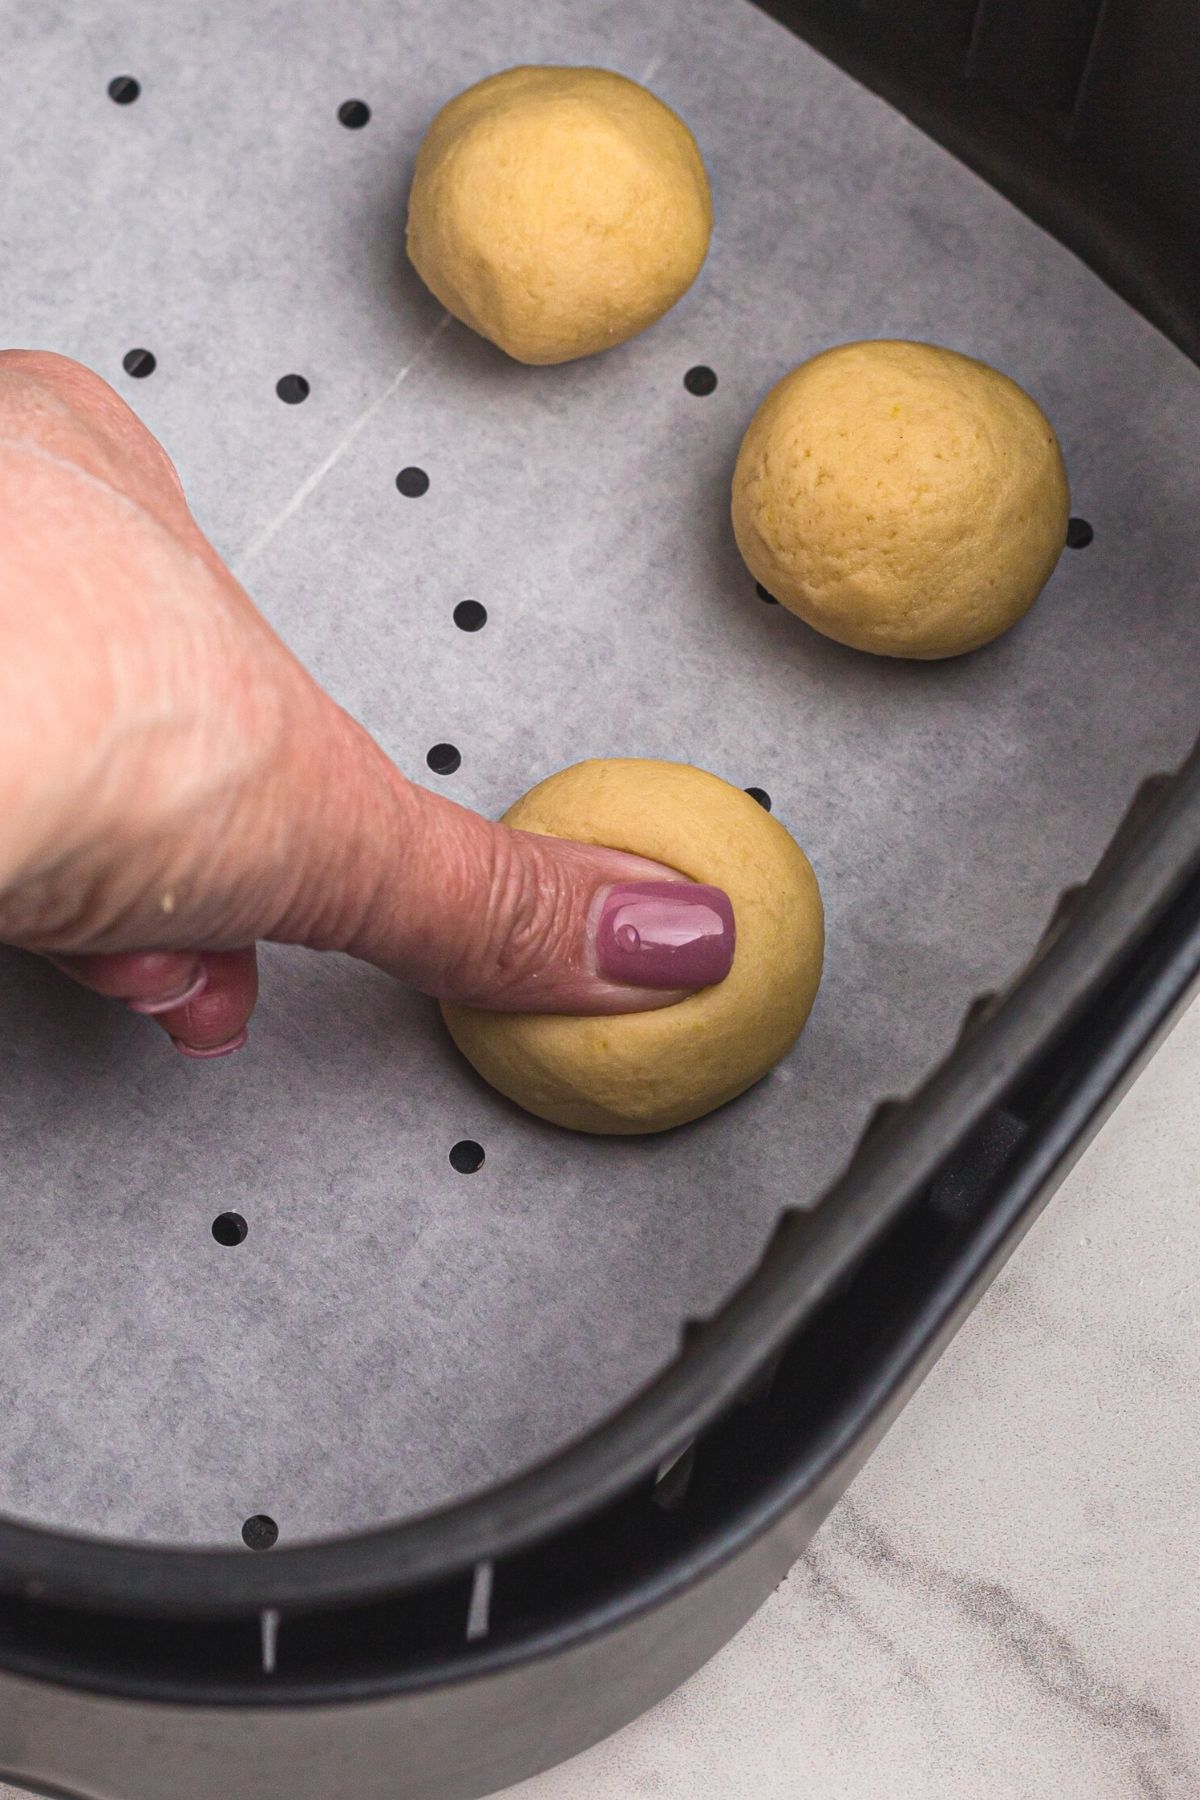 Cookie dough rolled in the air fryer basket and then a thumb pushing into dough to make a well